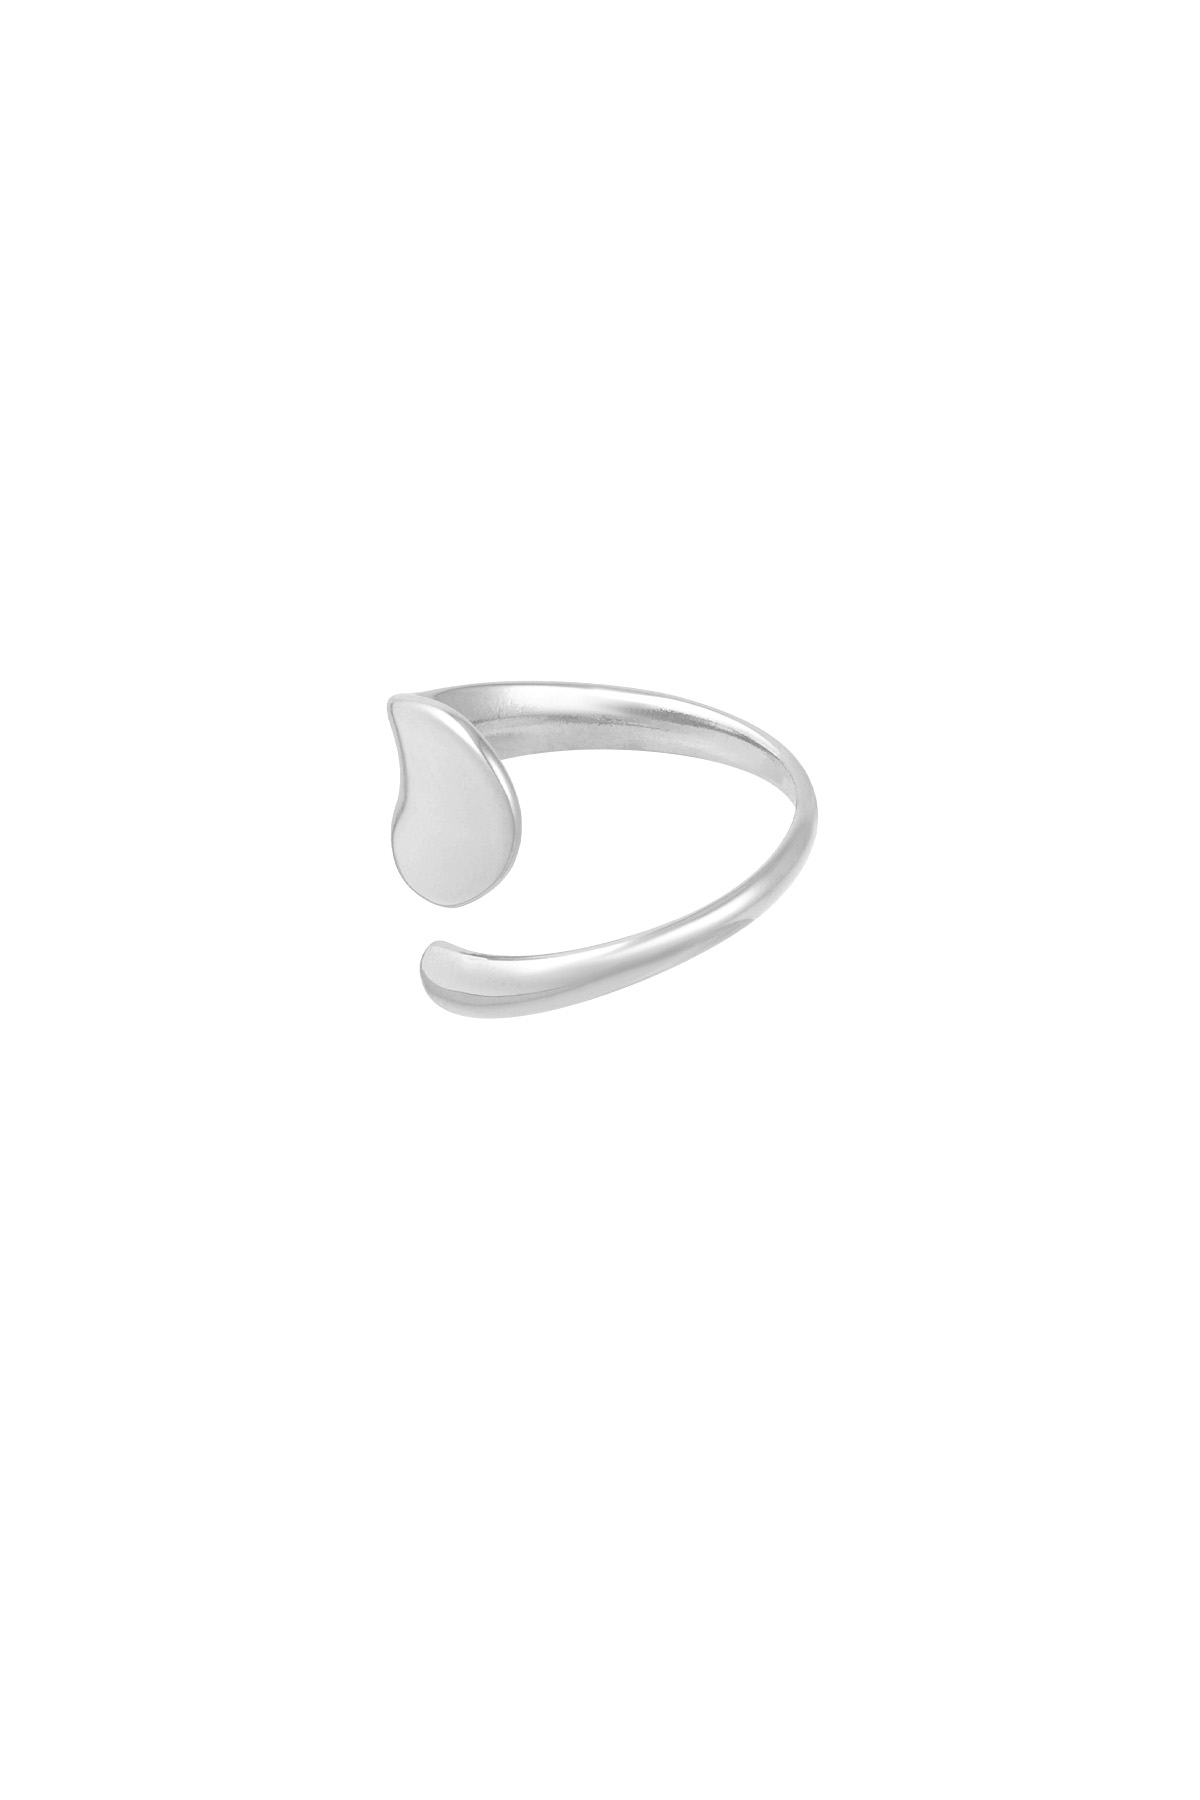 Ring simplicity rules - silver h5 Picture4